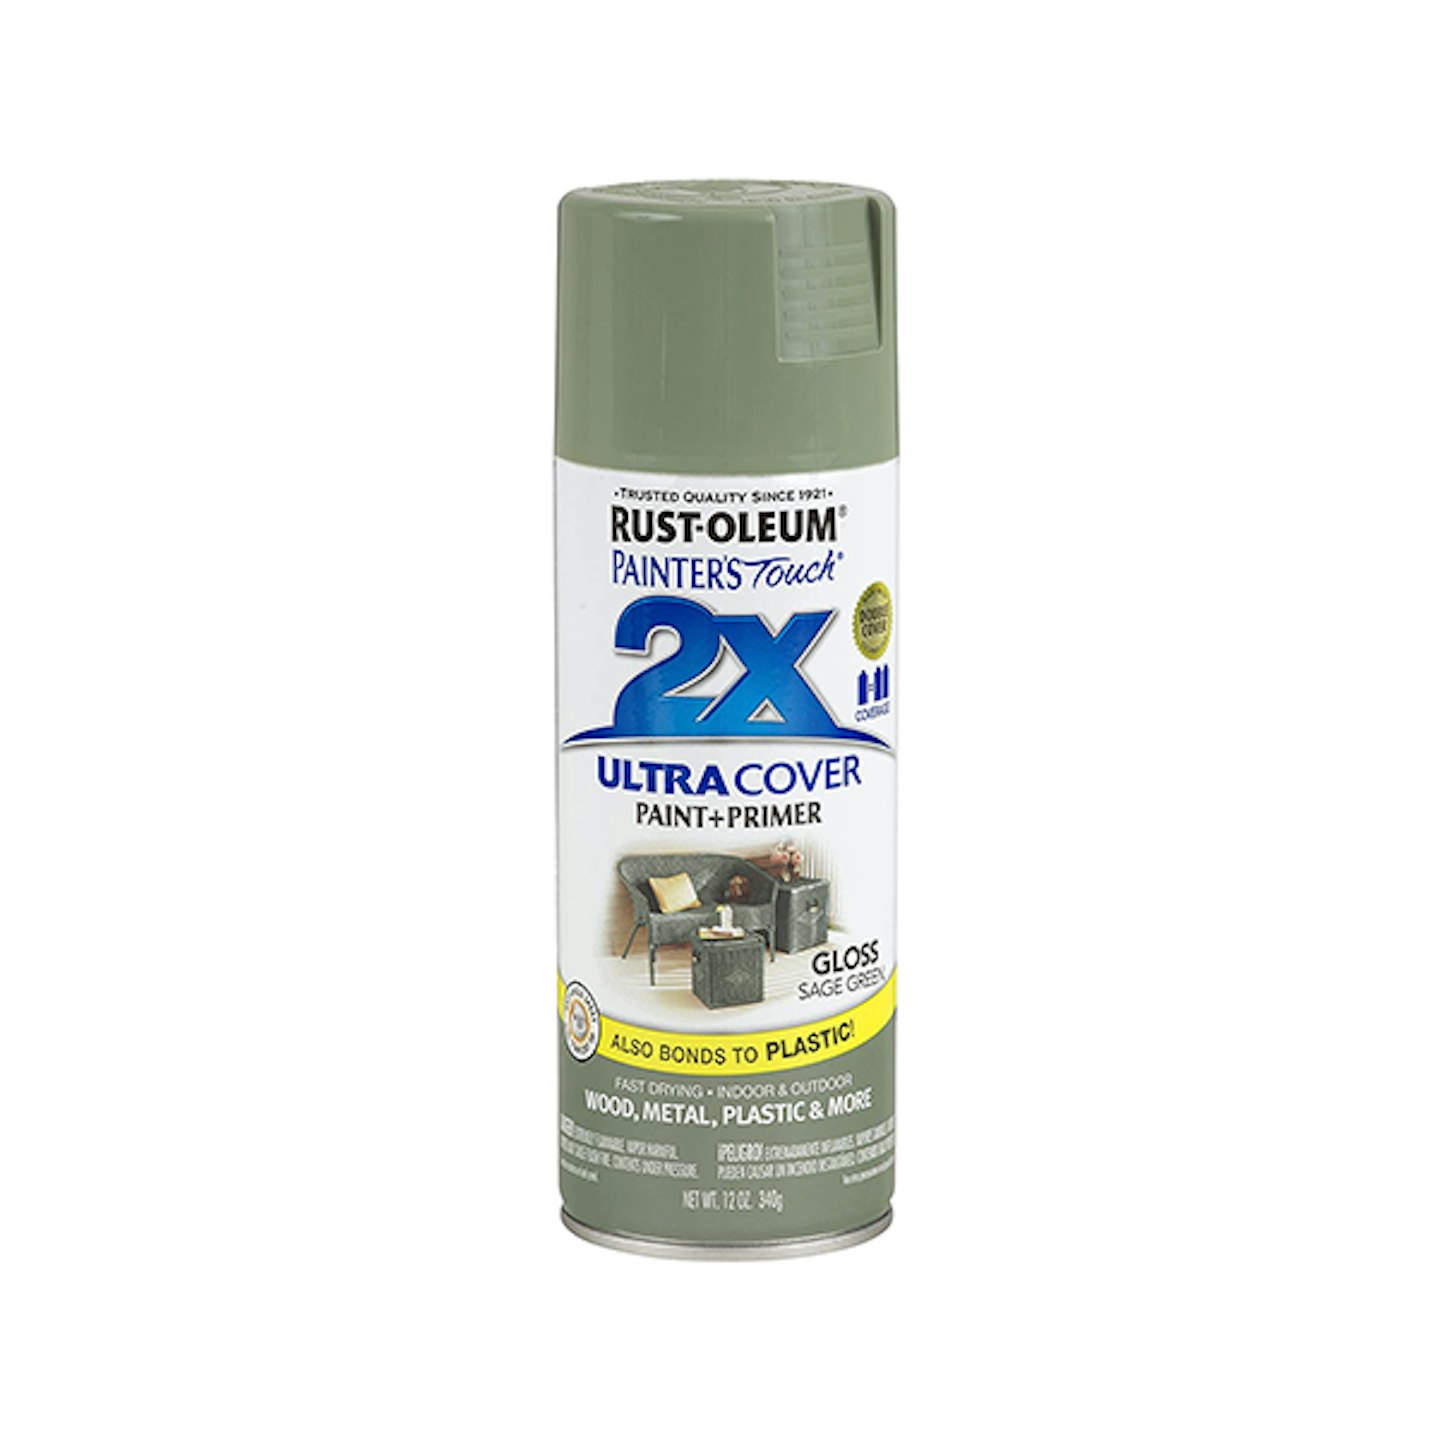 Rust-Oleum Painter's Touch 2X Ultra Cover, Gloss Sage Green